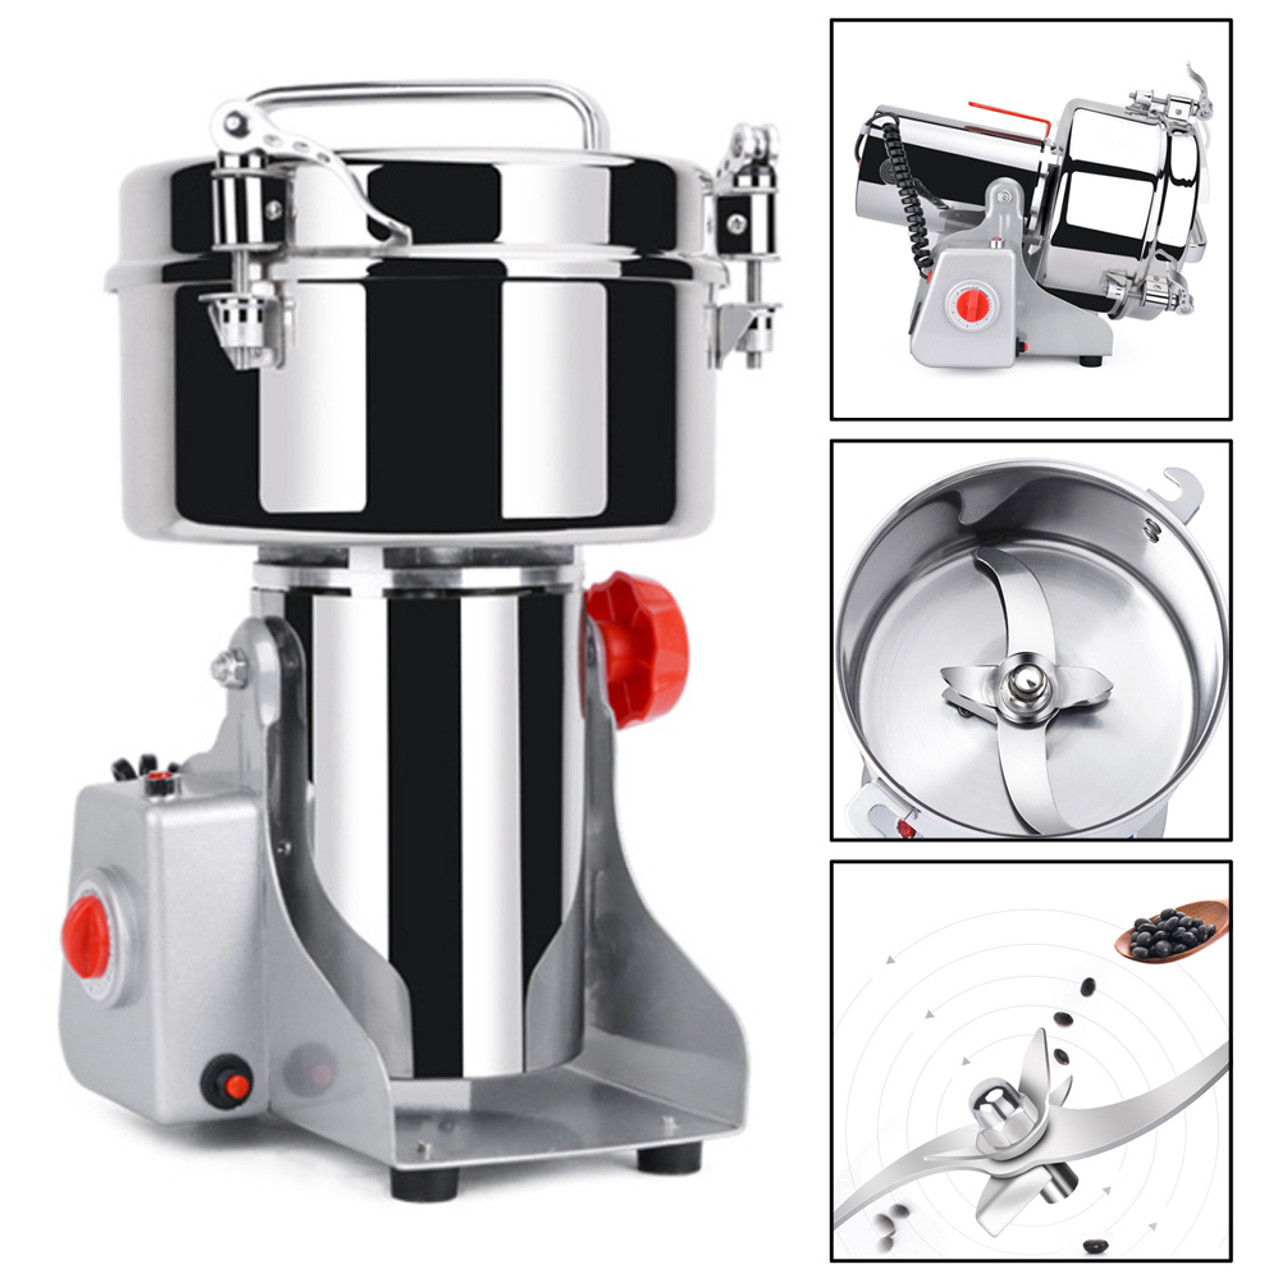 700g Electric Grains Spices Hebals Cereal Dry Food Grinder Mill